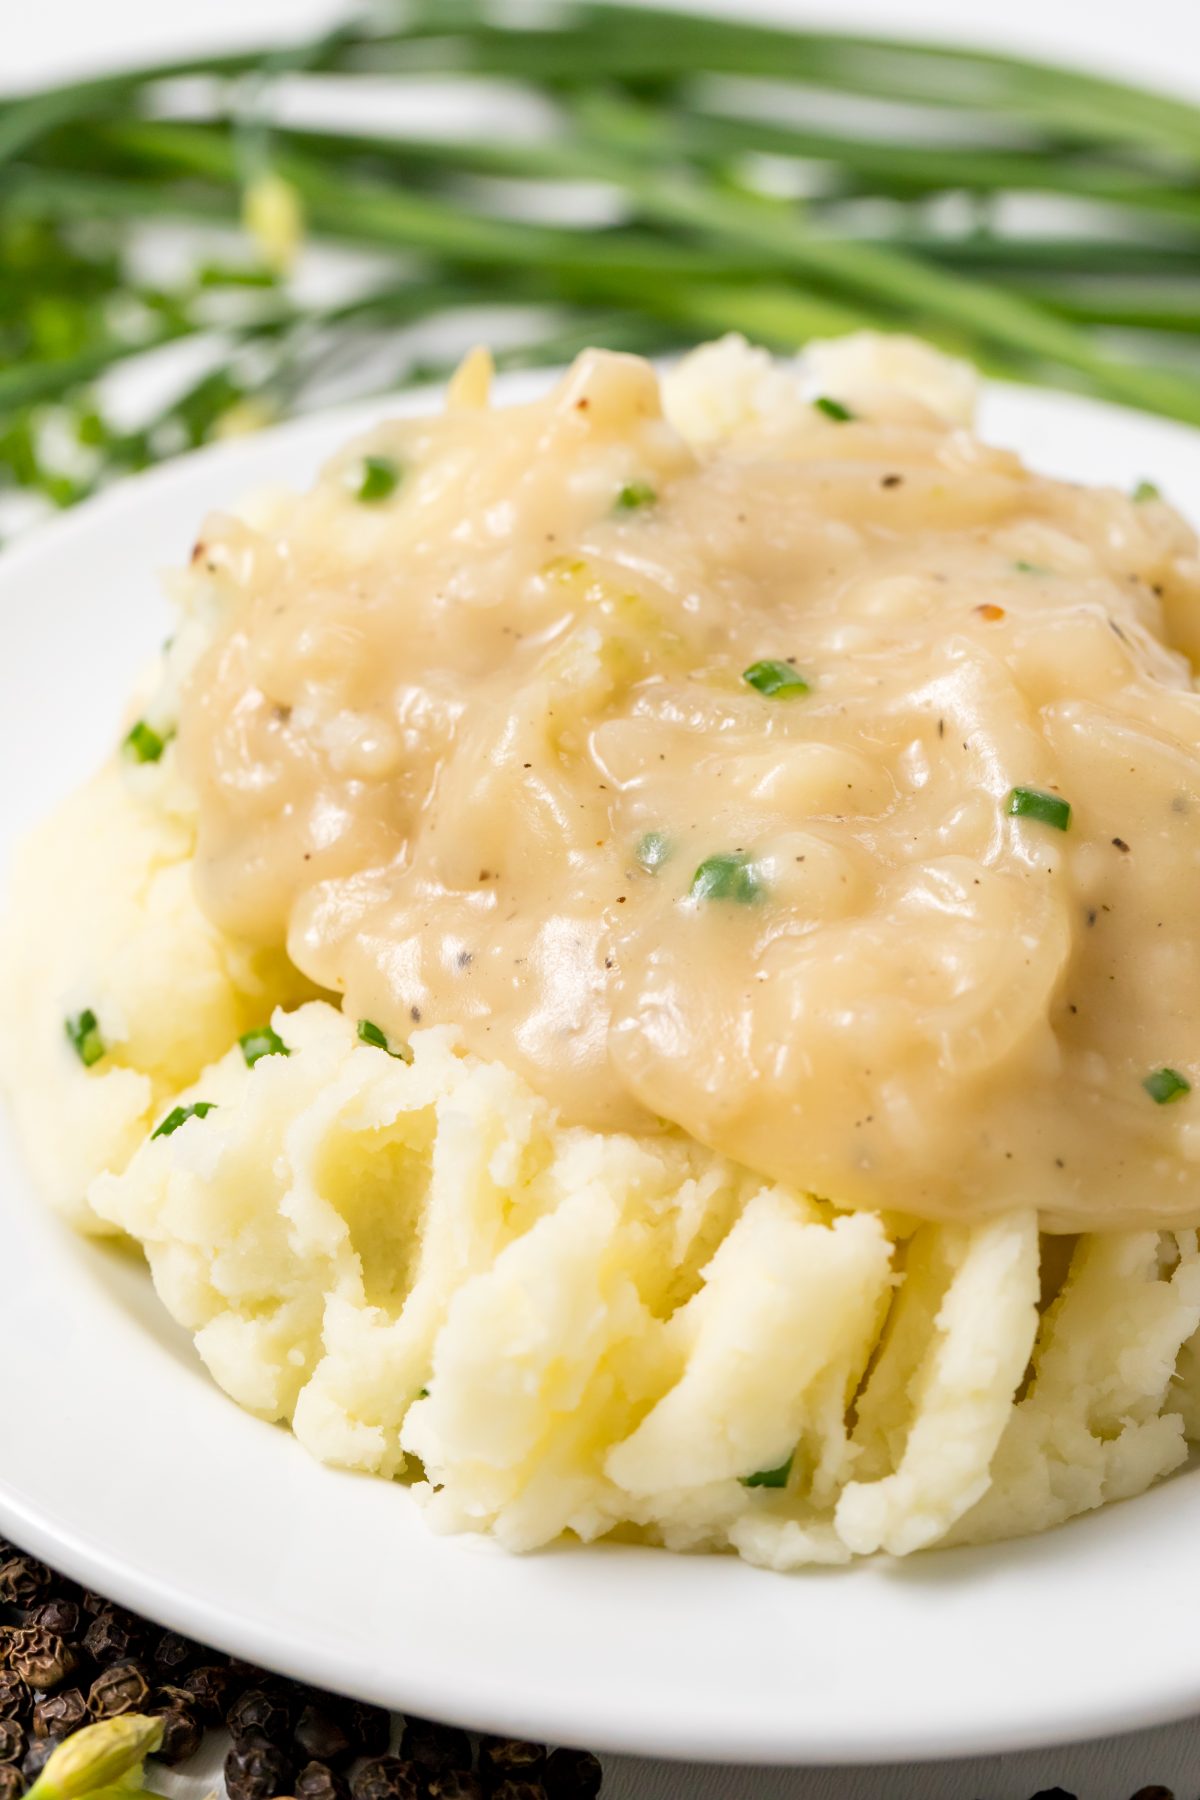 A gravy all of your guests will love!